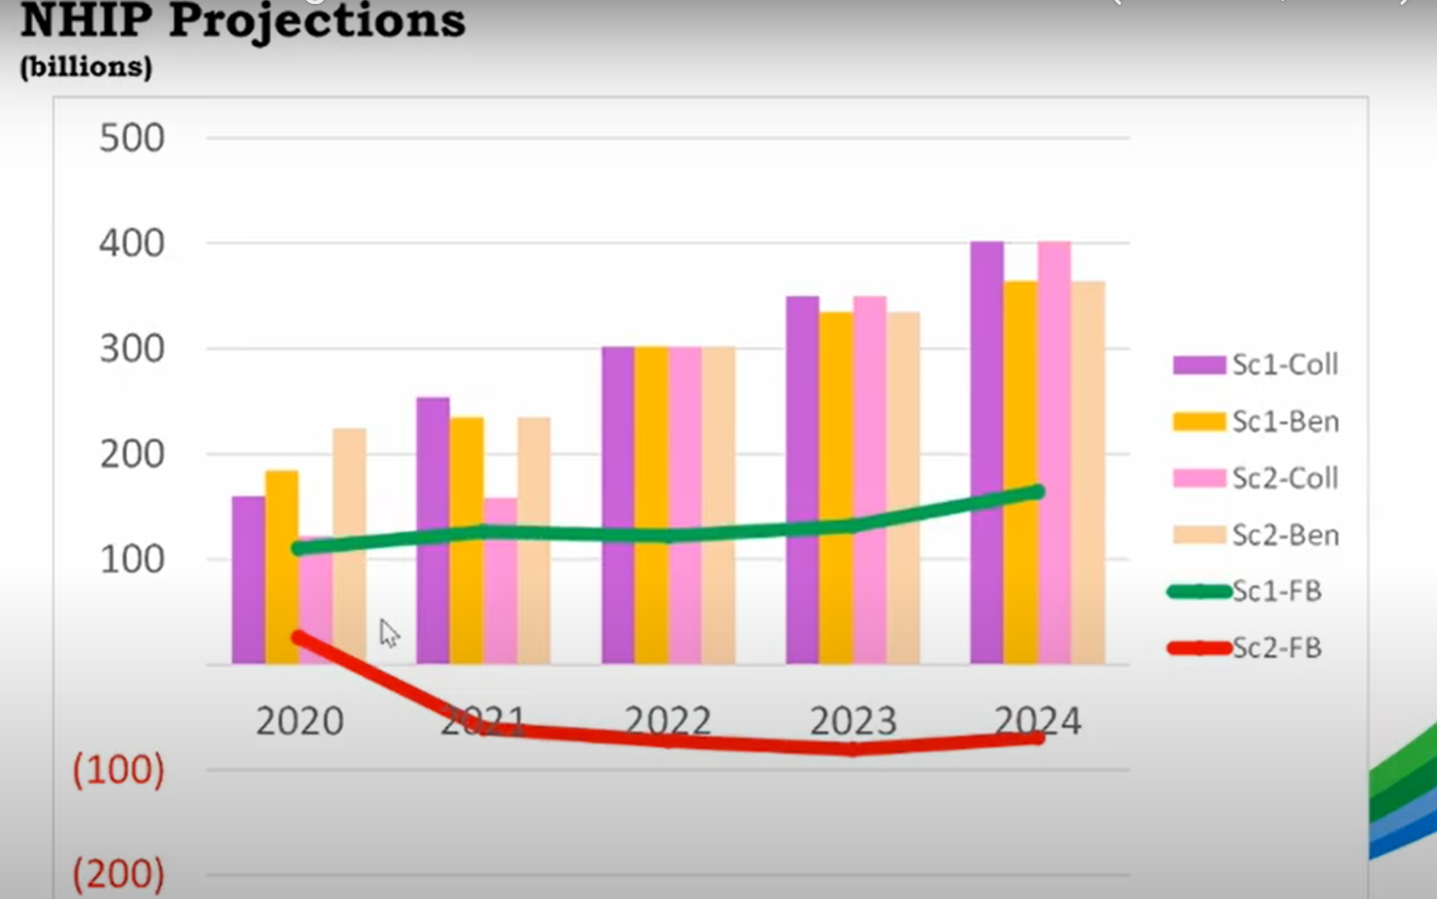 (Source: PhilHealth's presentation during the Joint Congressional Oversight Committee hearing on Universal Health Care. PhilHealth President Ricardo Morales explained that the green line refers to fund projections in a pre-COVID-19 scenario while the red one refers to projections amid the COVID-19 situation.) 